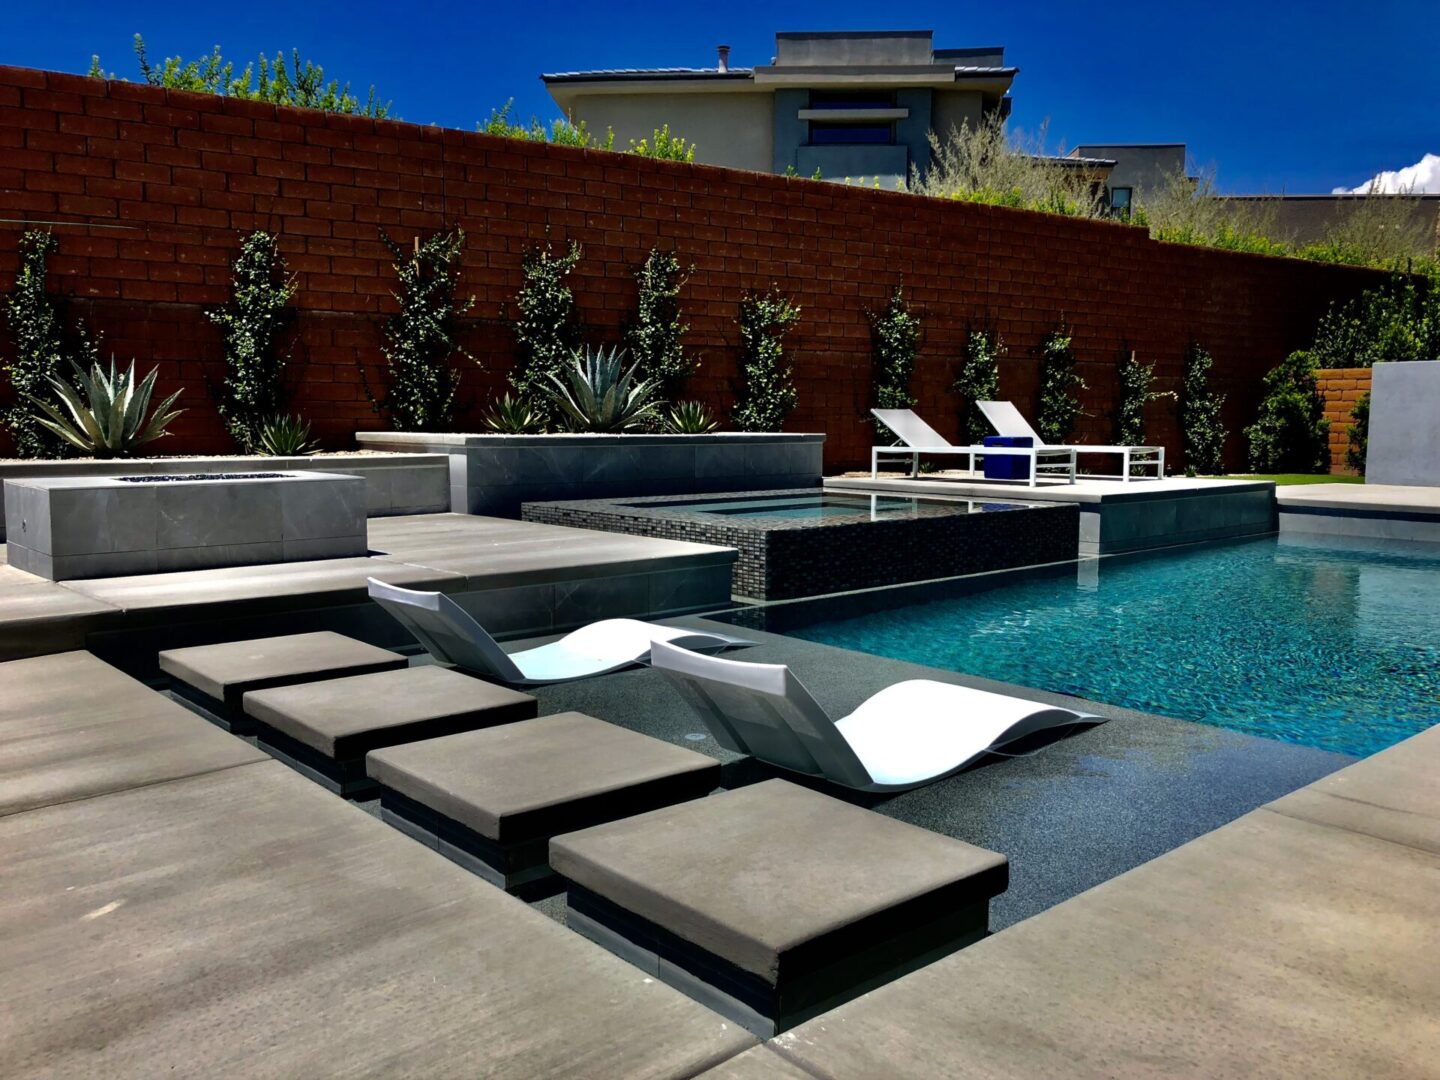 A pool with lounge chairs and a bench.